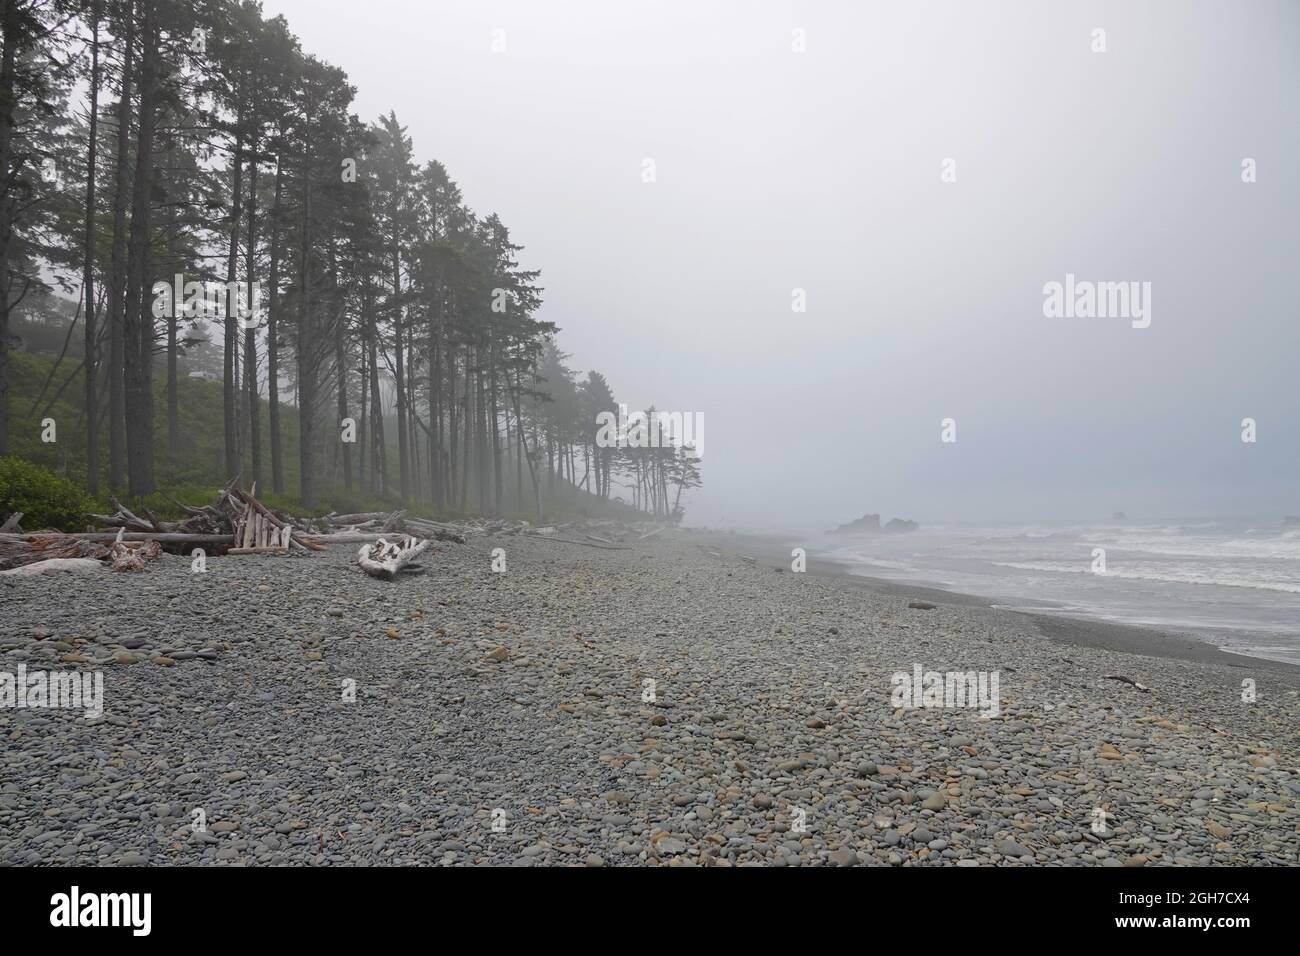 Ruby Beach is shown along the west coast of Washington state, USA during a foggy, summer day. Stock Photo